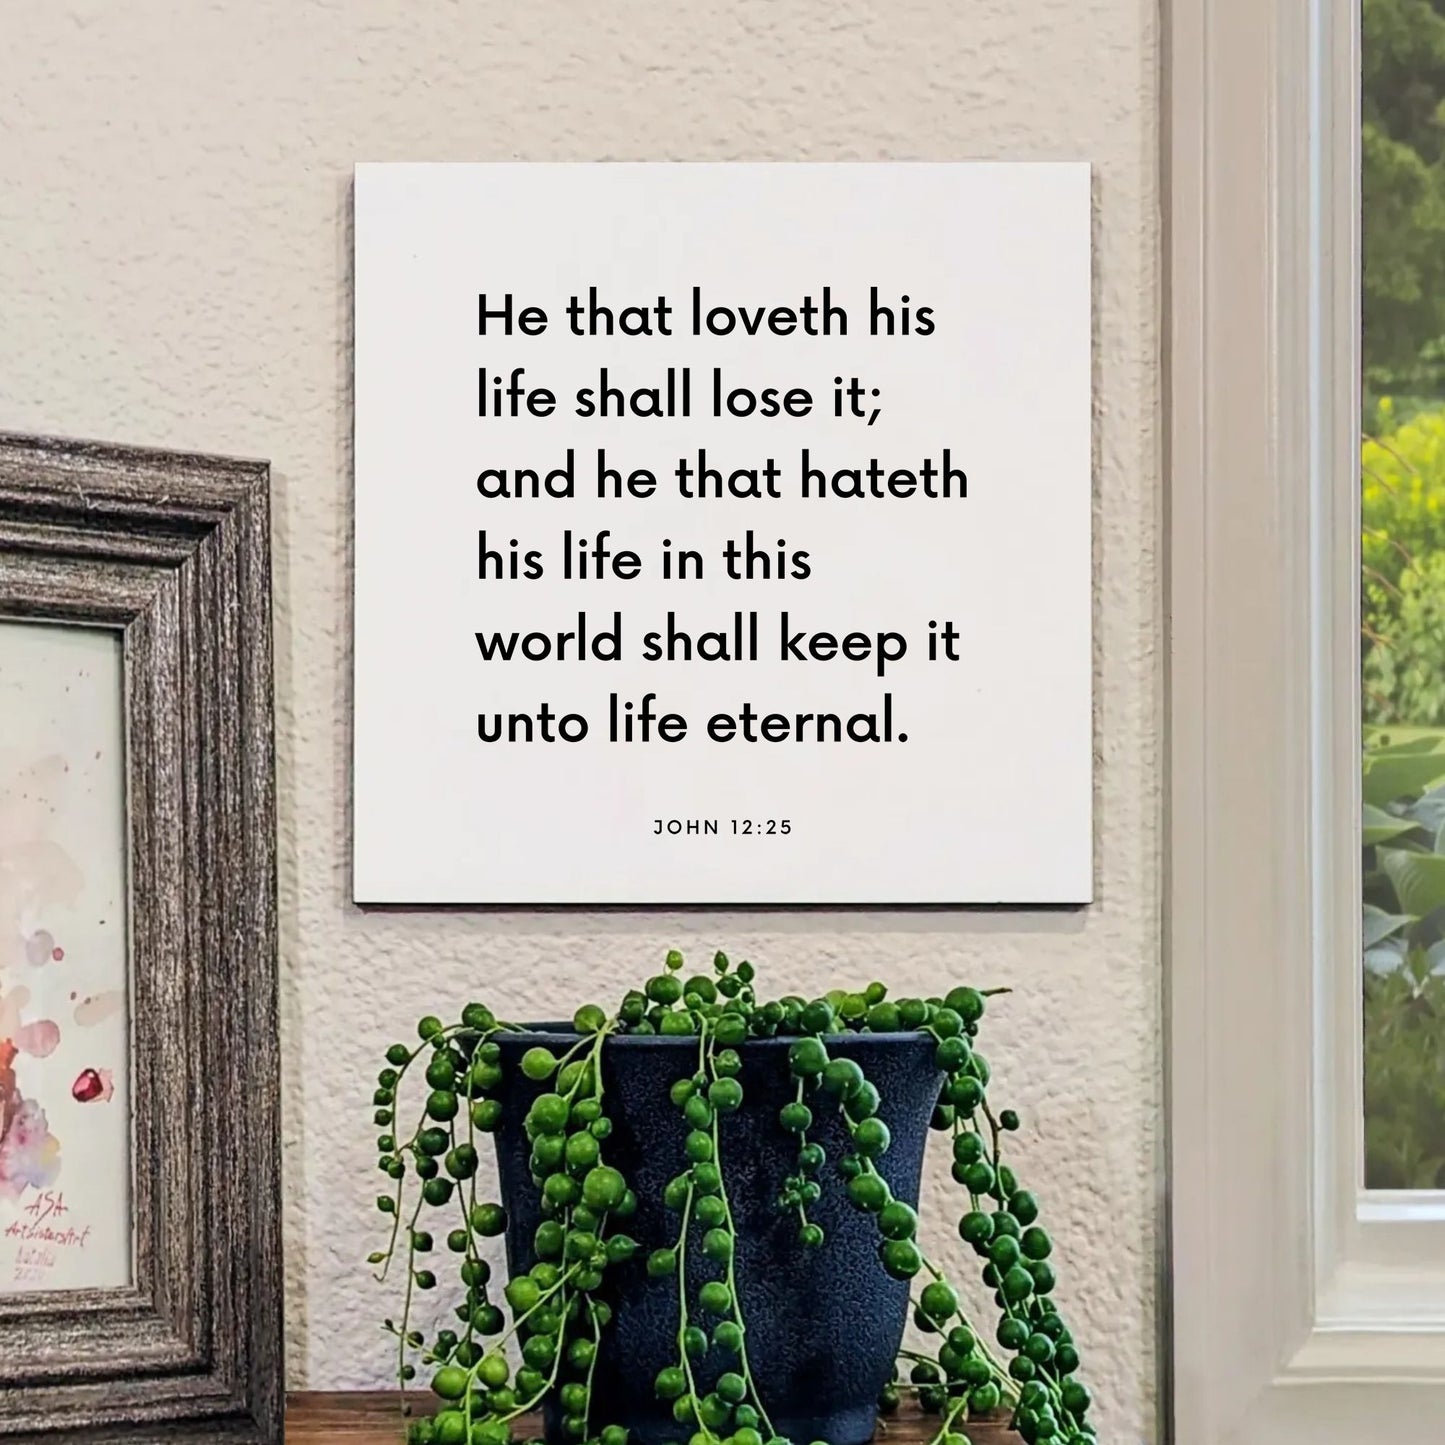 Window mouting of the scripture tile for John 12:25 - "He that loveth his life shall lose it"